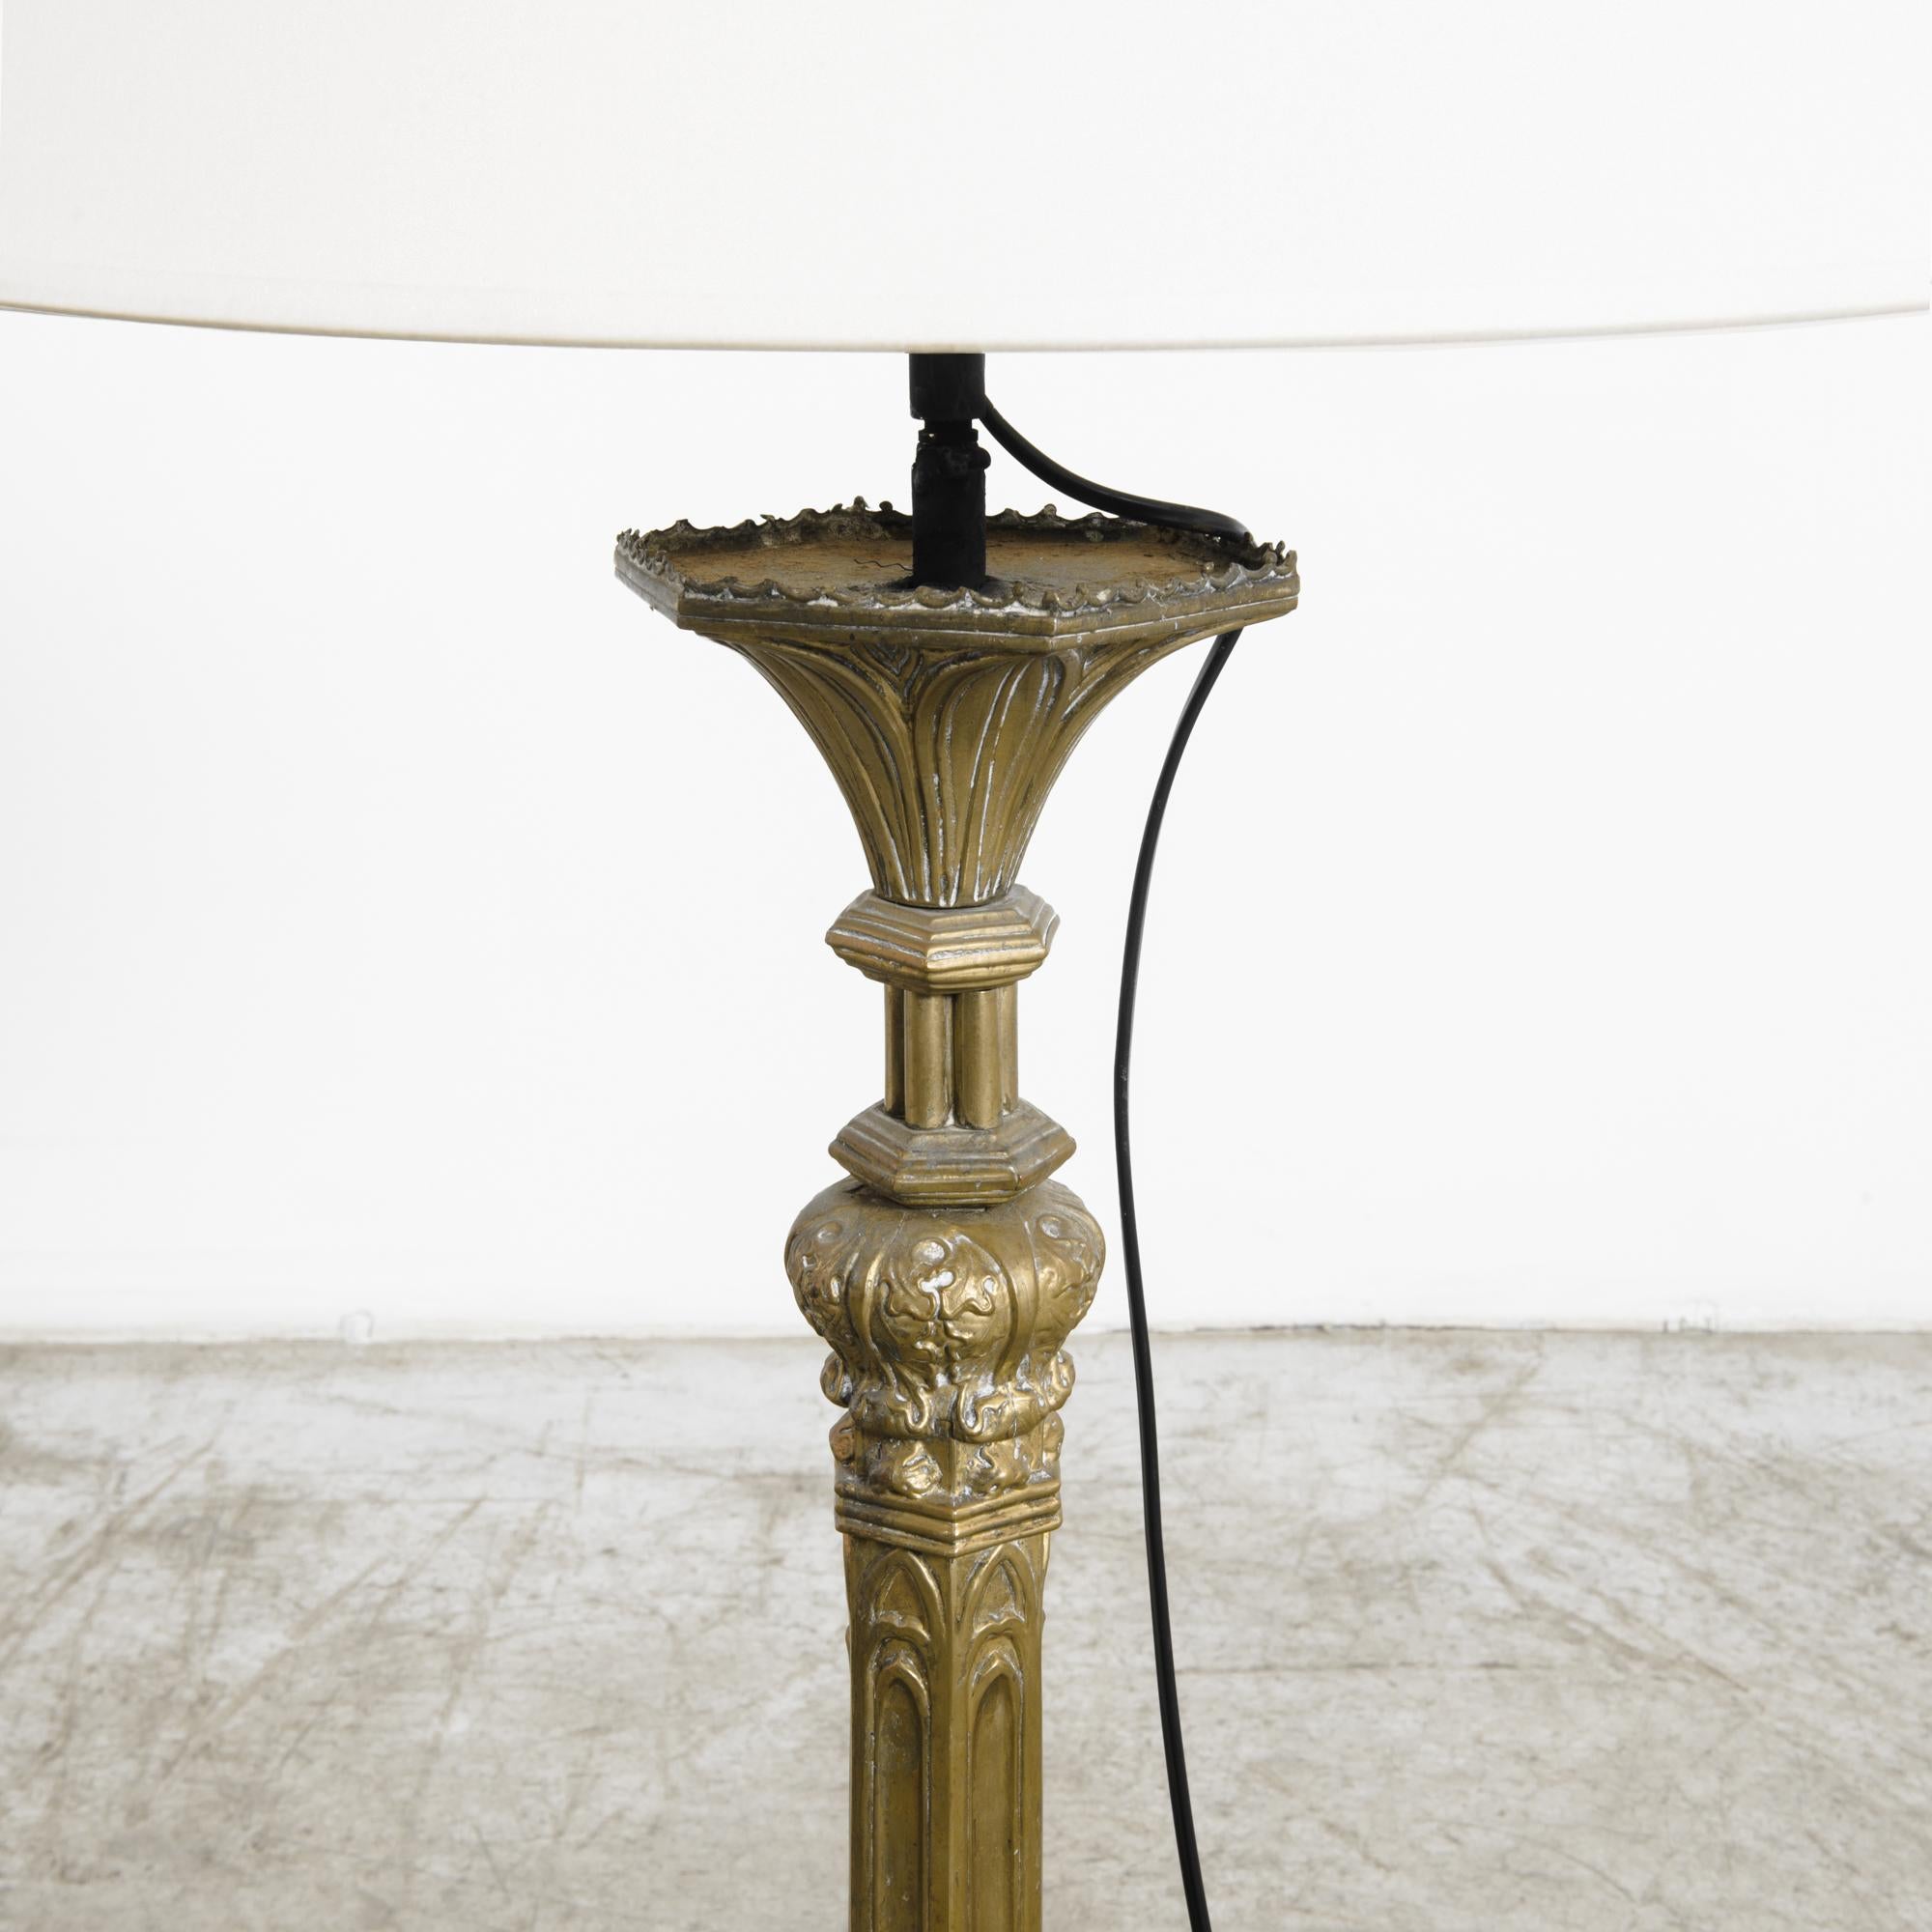 In the refined ambiance of late 19th-century France, this metal floor lamp from the 1880s stands as a testament to both elegance and innovation. Crafted with meticulous attention to detail, this piece exemplifies the enduring craftsmanship and